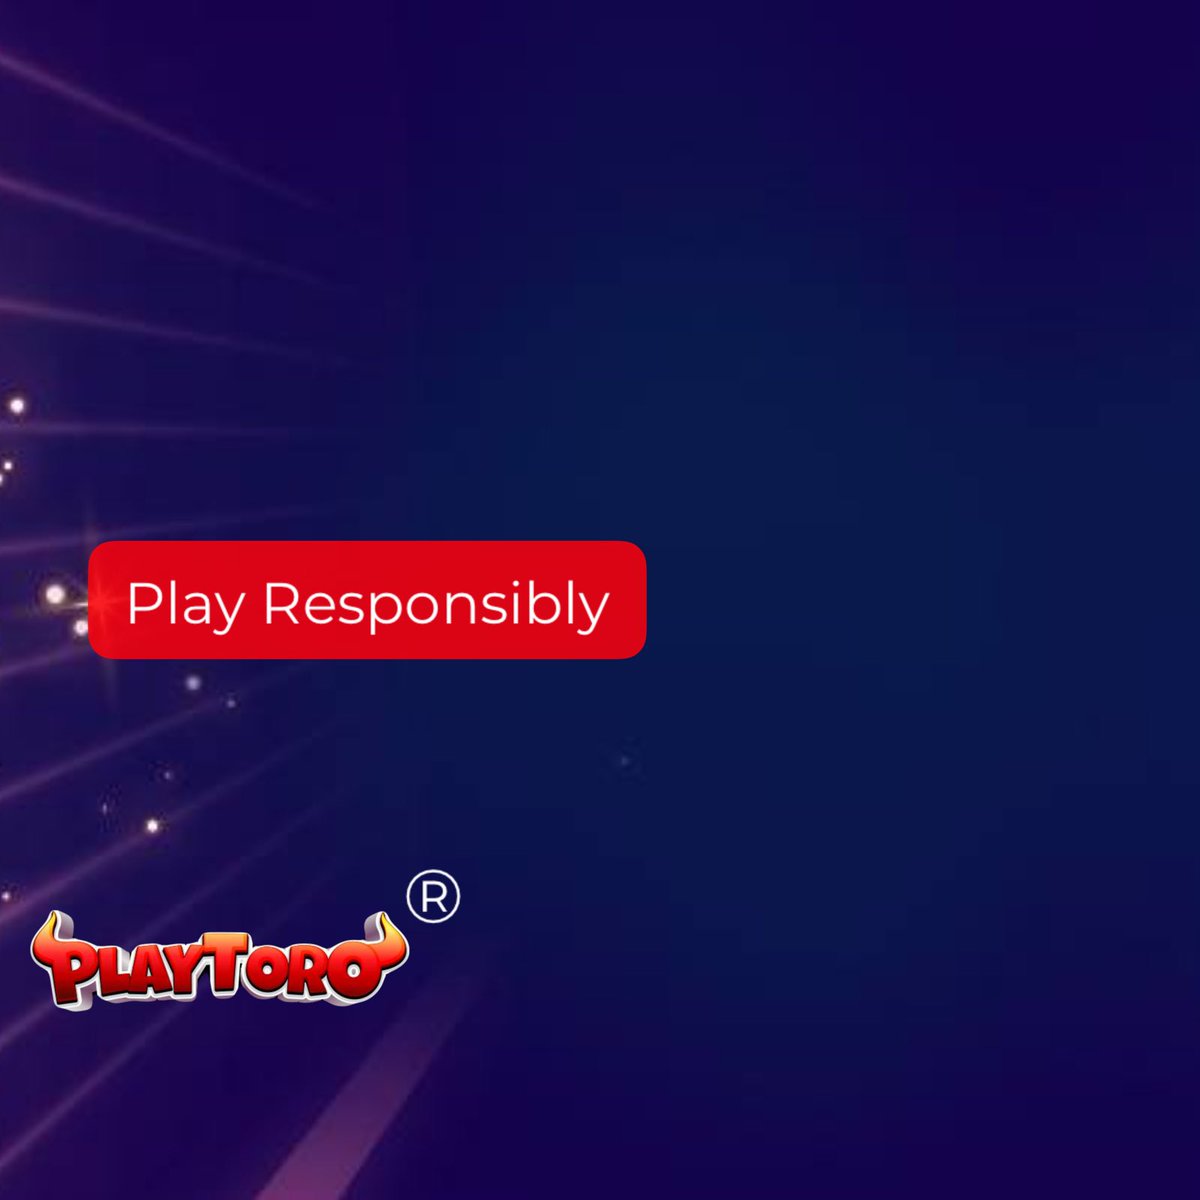 Ready to play?🚀

Remember to set you time and money limit! Here comes your new era of responsible gaming!💎

Have fun! Please, play sober and never play for the money you can't afford to lose. And don't chase losses!

#playresponsibly #casinoonline